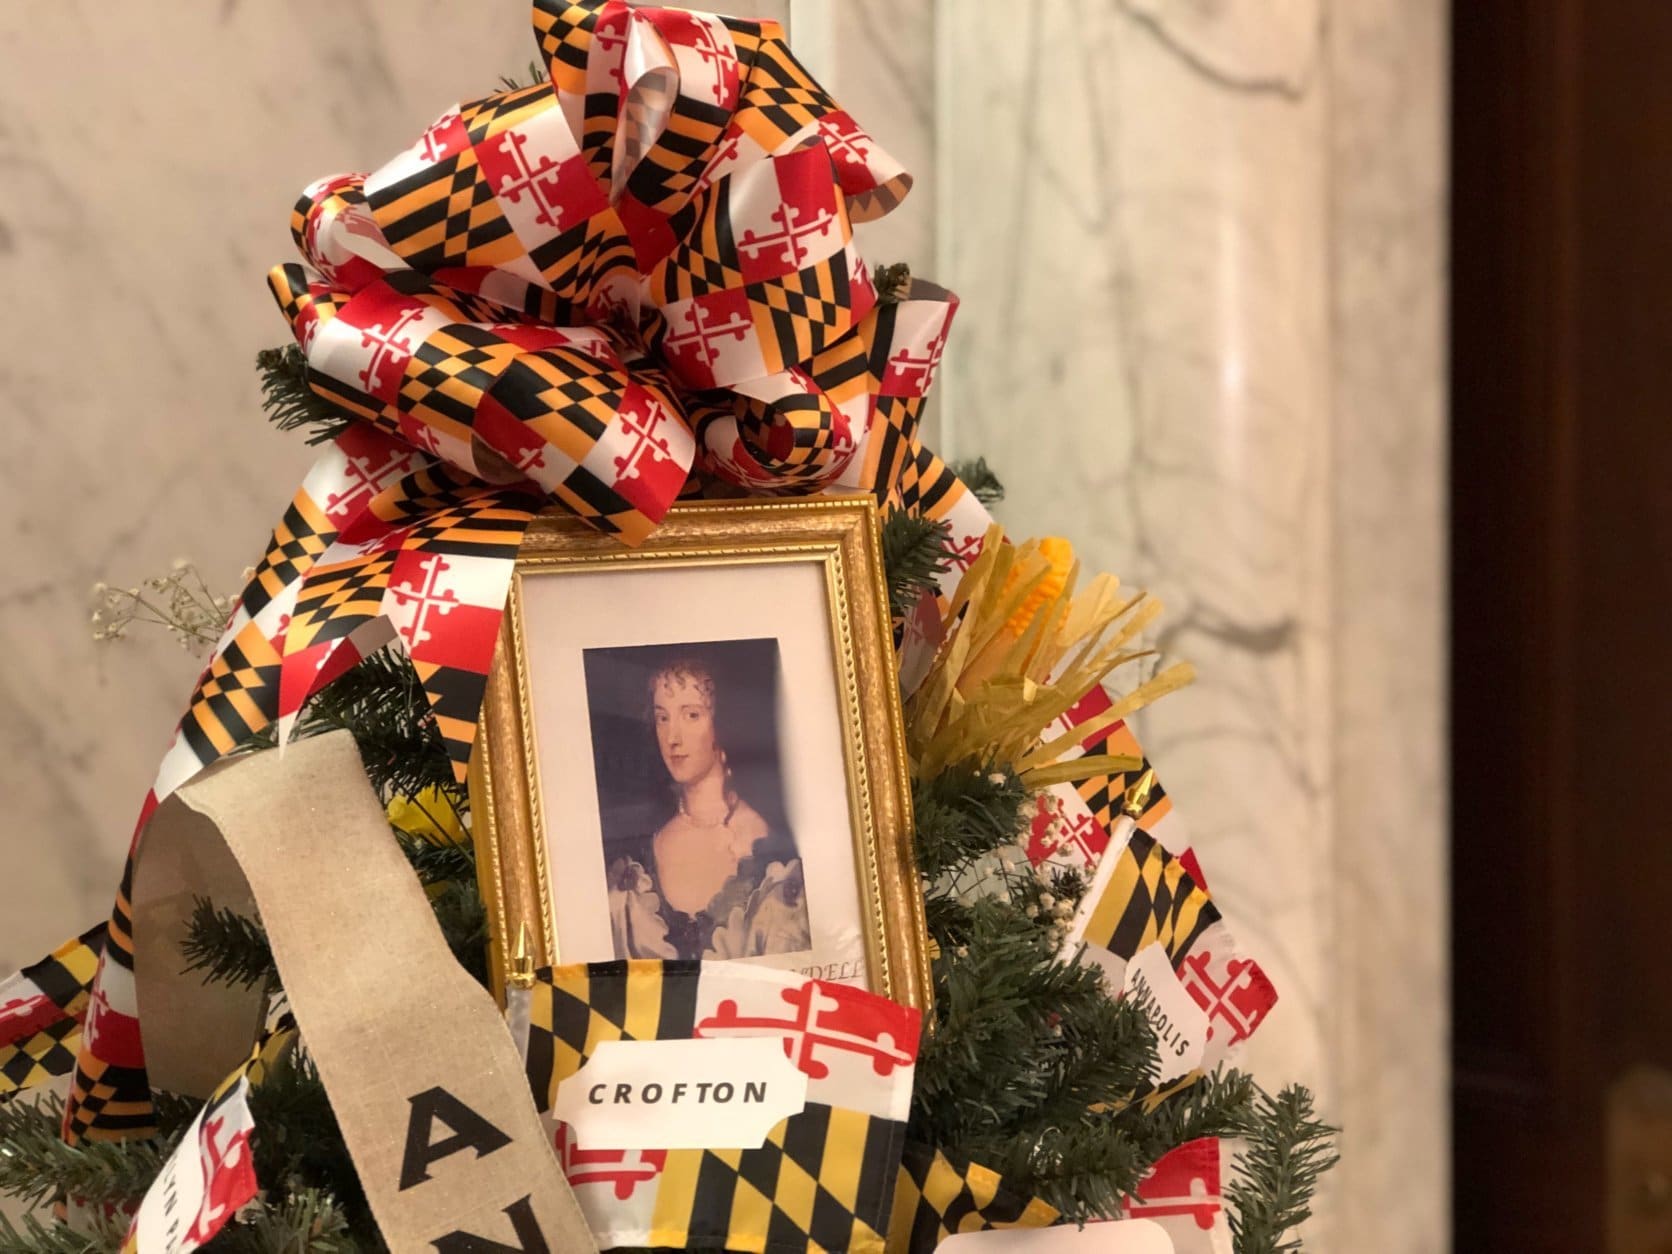 Anne Arundel isn’t just the name of a county in Maryland — it’s the name of an English noblewoman who married Cecil Calvert, second Lord Baltimore. Her name is sometimes spelled “Arundel.” She’s pictured here in an Anne Arundel County-themed Christmas tree on view at Maryland’s State House in Annapolis, Md. (WTOP/Kate Ryan)